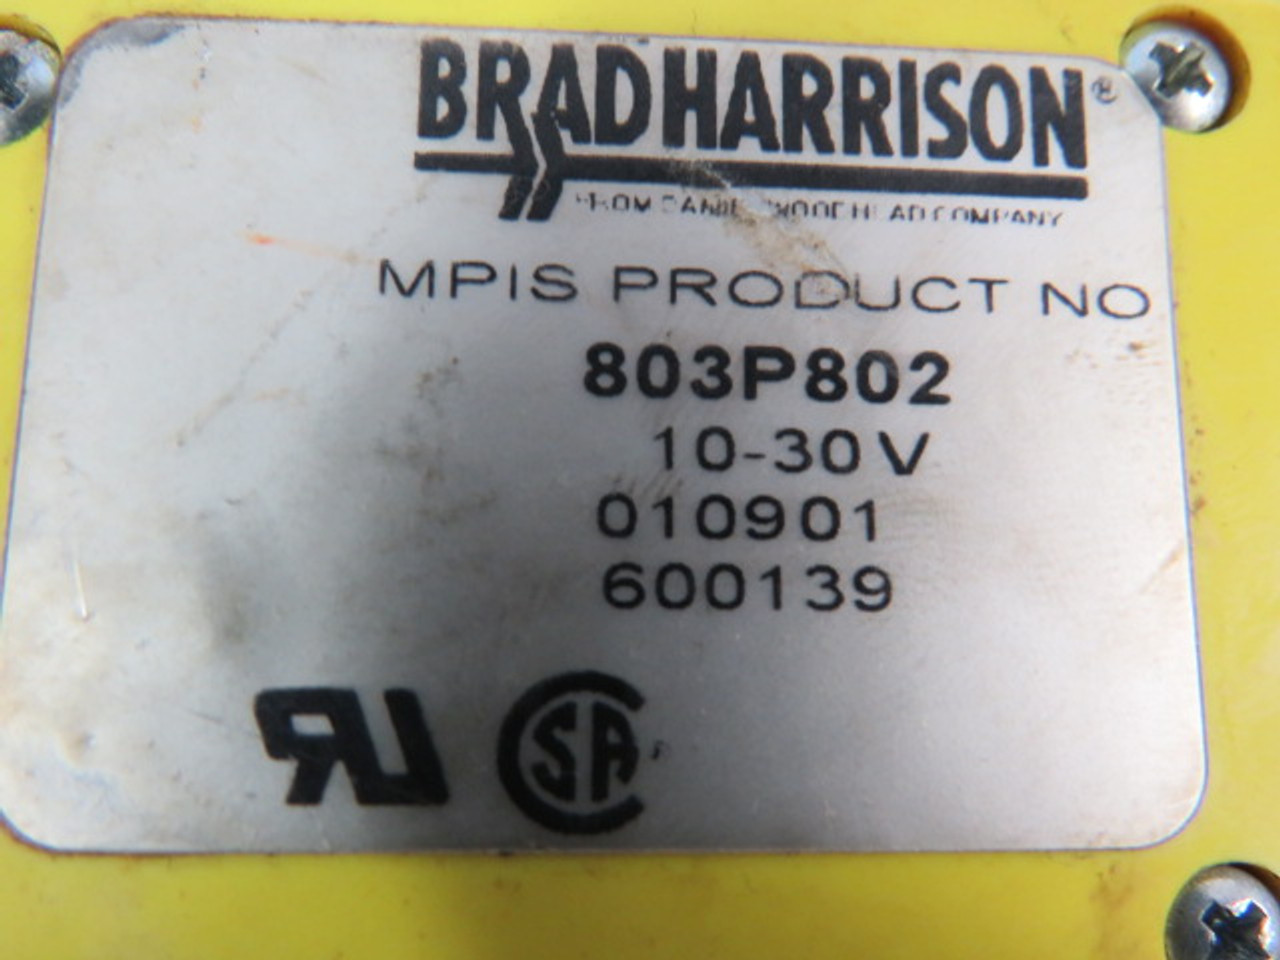 Brad Harrison 803P802 Multi Port Interconnect System 10-30V 8 Ports ! AS IS !